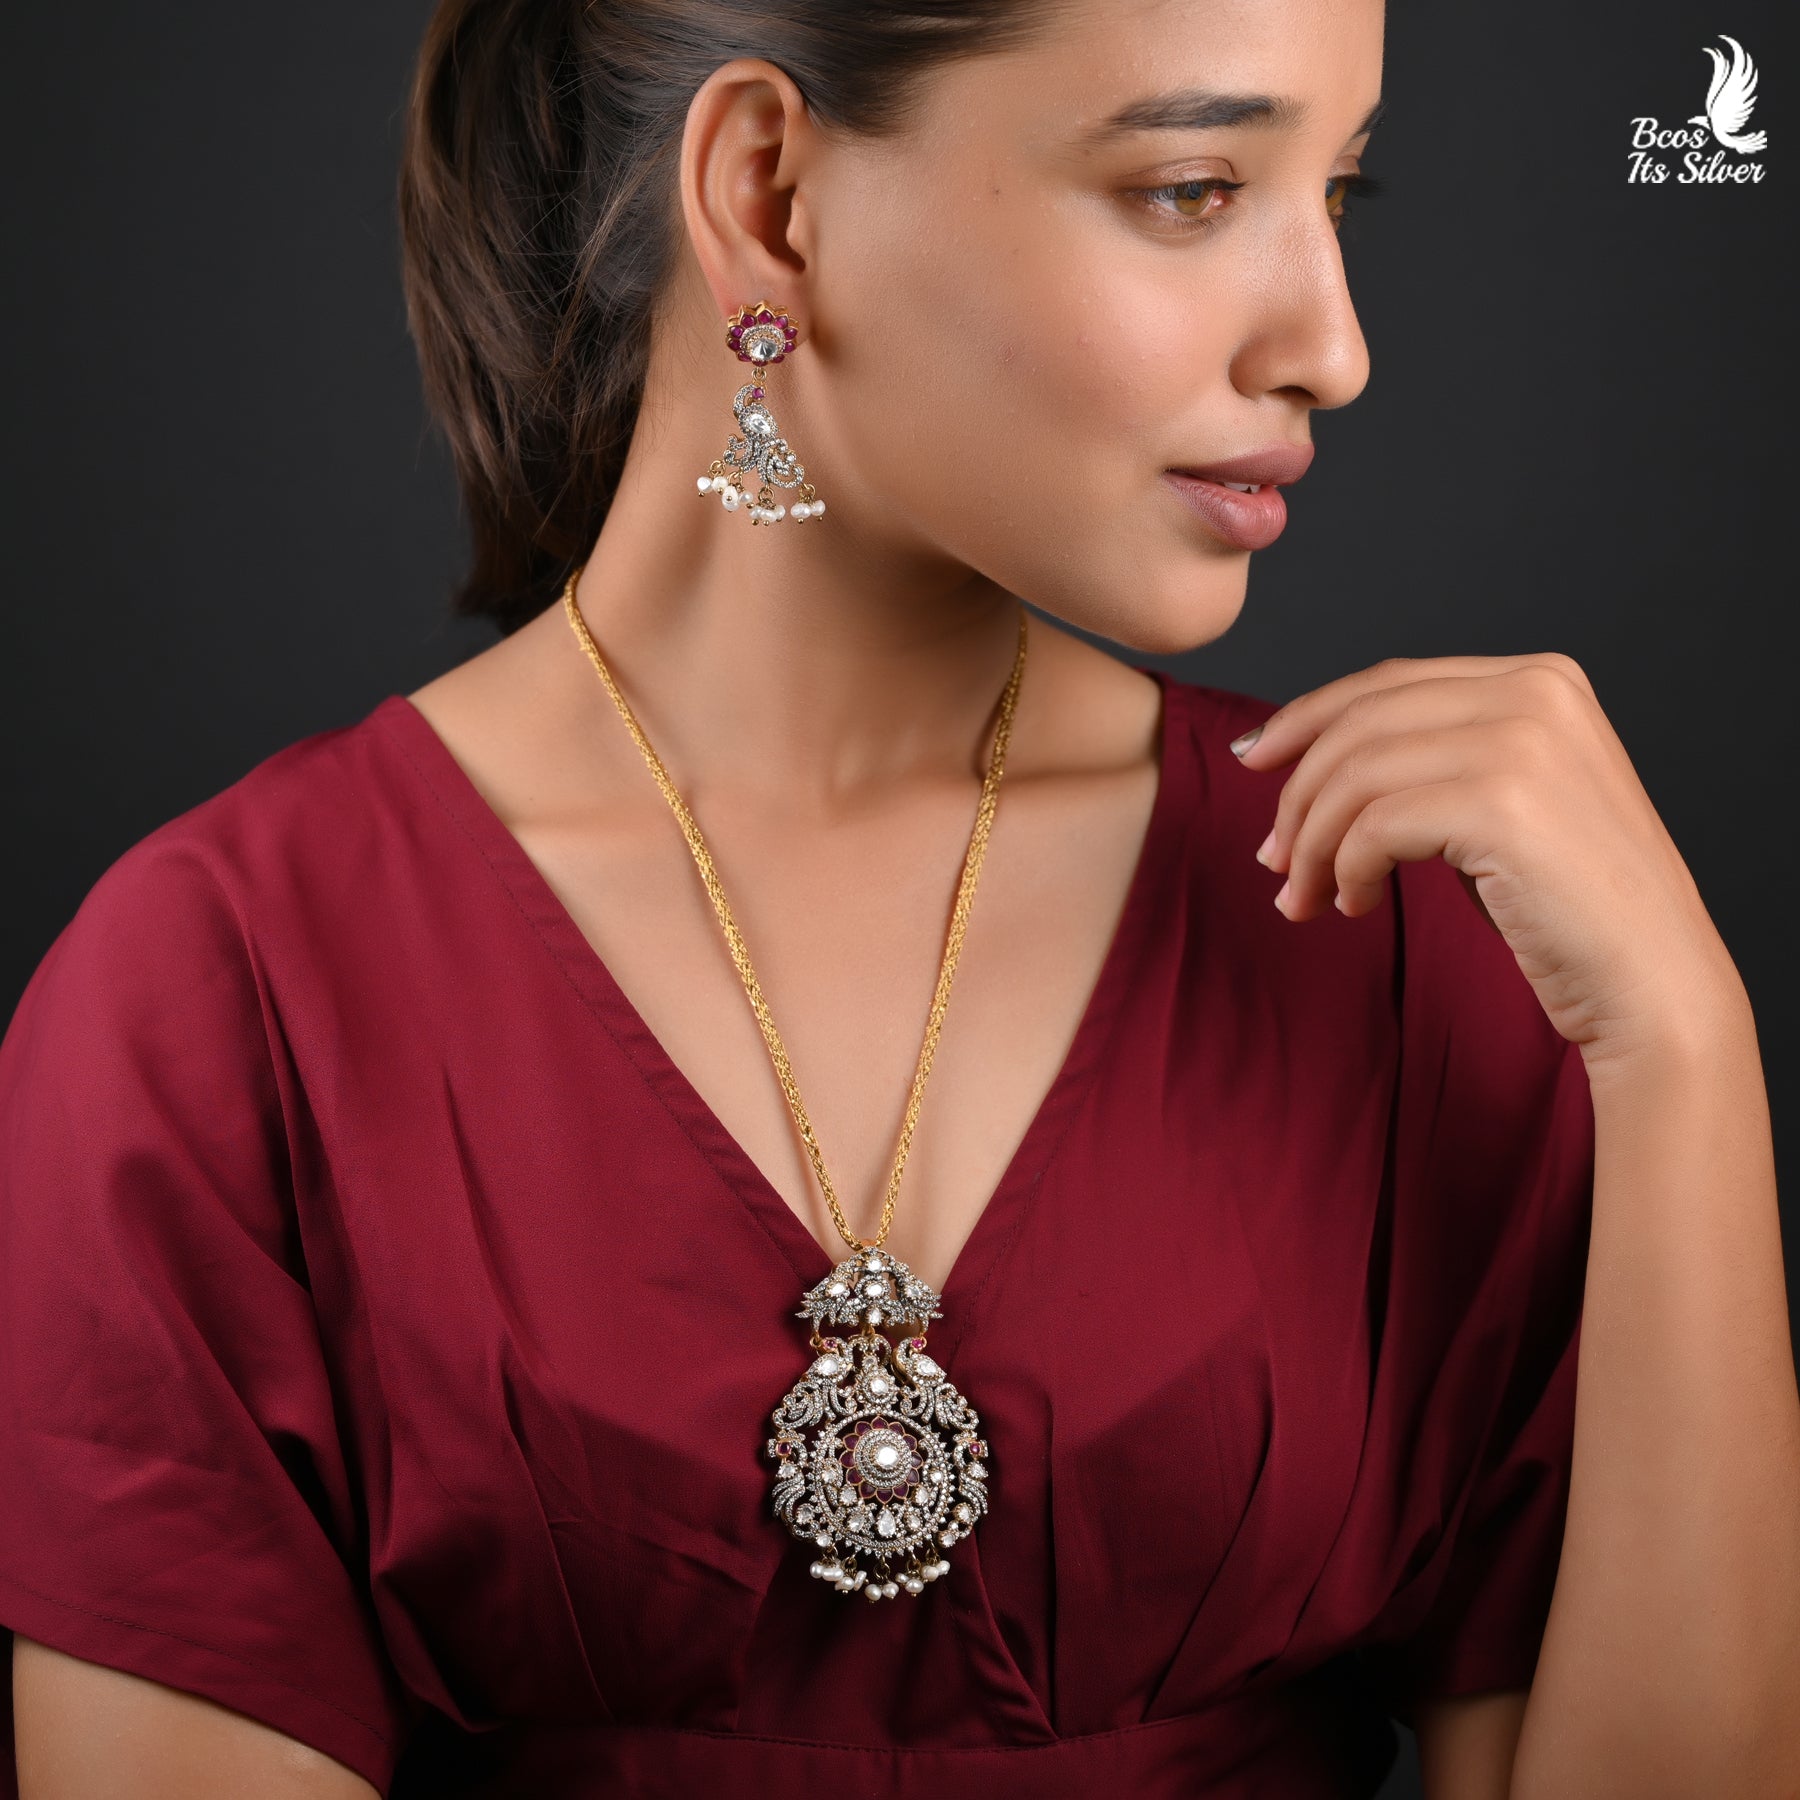 Victorian Pendant with Earring - 3259